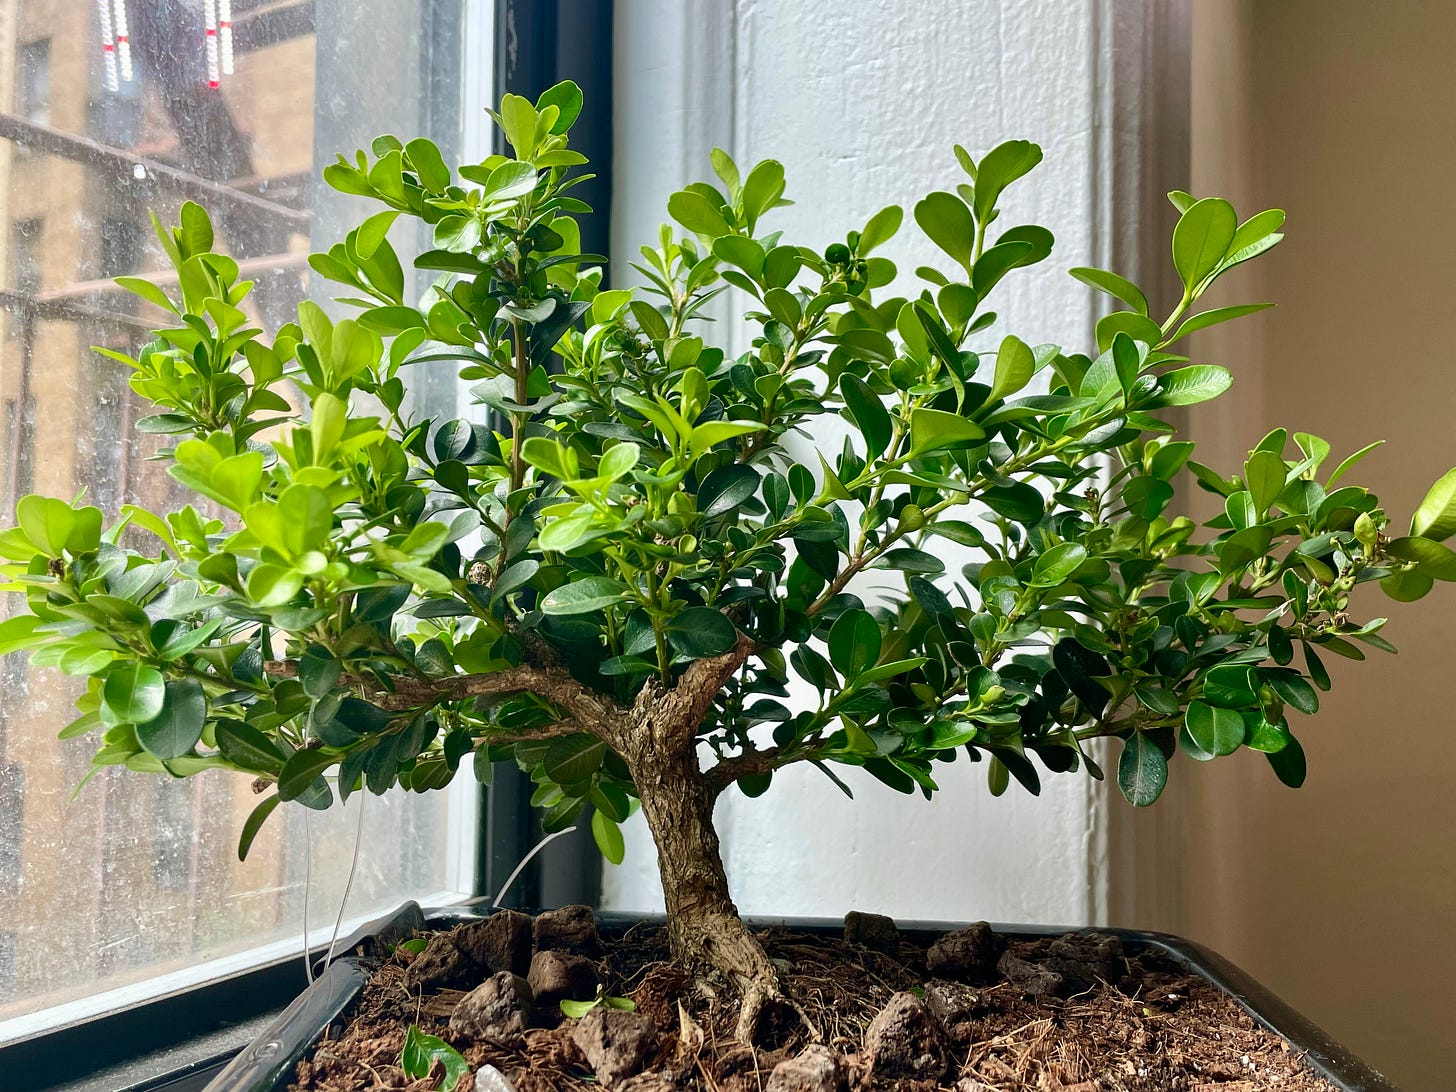 ID: Photo of a boxwood tree in a bonsai pot, short and squat with ample tufts of foliage.